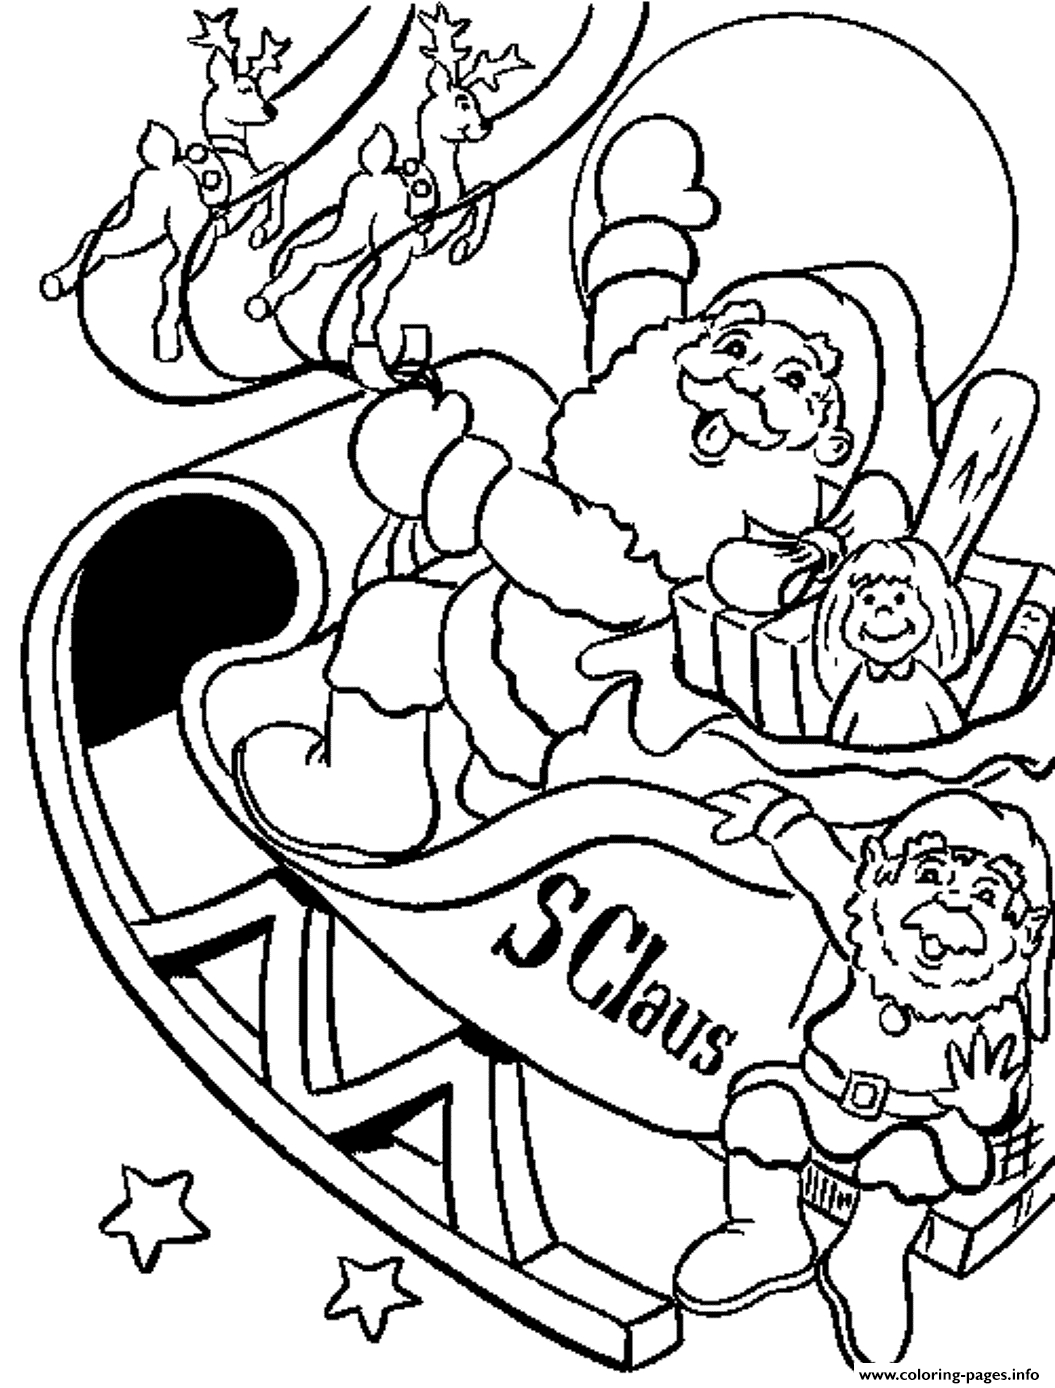 Santa Claus In Sleigh Coloring Page Santa And Sleigh Drawing Free Download Best Santa And Sleigh